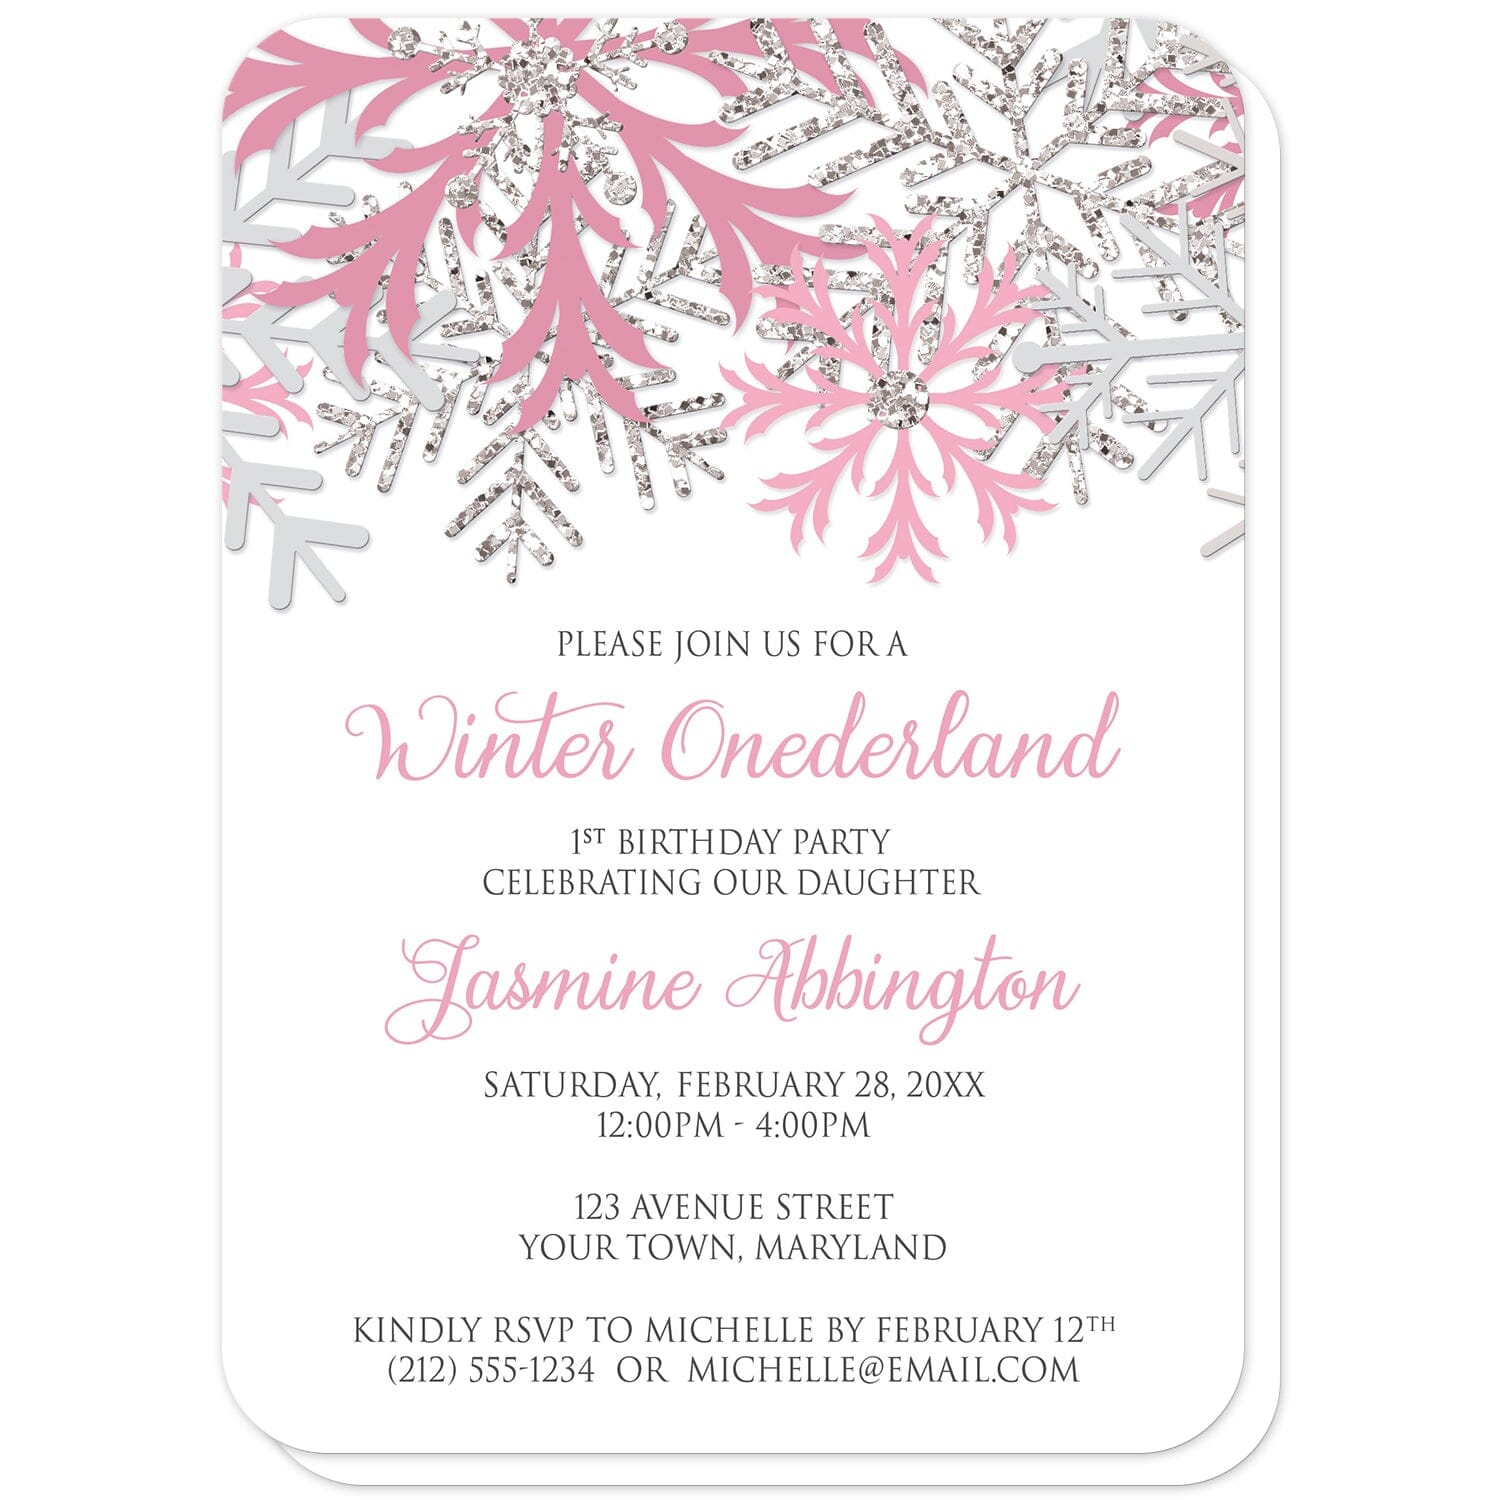 Pink Silver Snowflake 1st Birthday Winter Onederland Invitations (with rounded corners) at Artistically Invited. Pretty pink silver snowflake 1st birthday Winter Onederland invitations designed with pink, light pink, silver-colored glitter-illustrated, and light gray snowflakes along the top of the invitations. Your personalized 1st birthday party details are custom printed in pink and gray on white below the snowflakes.